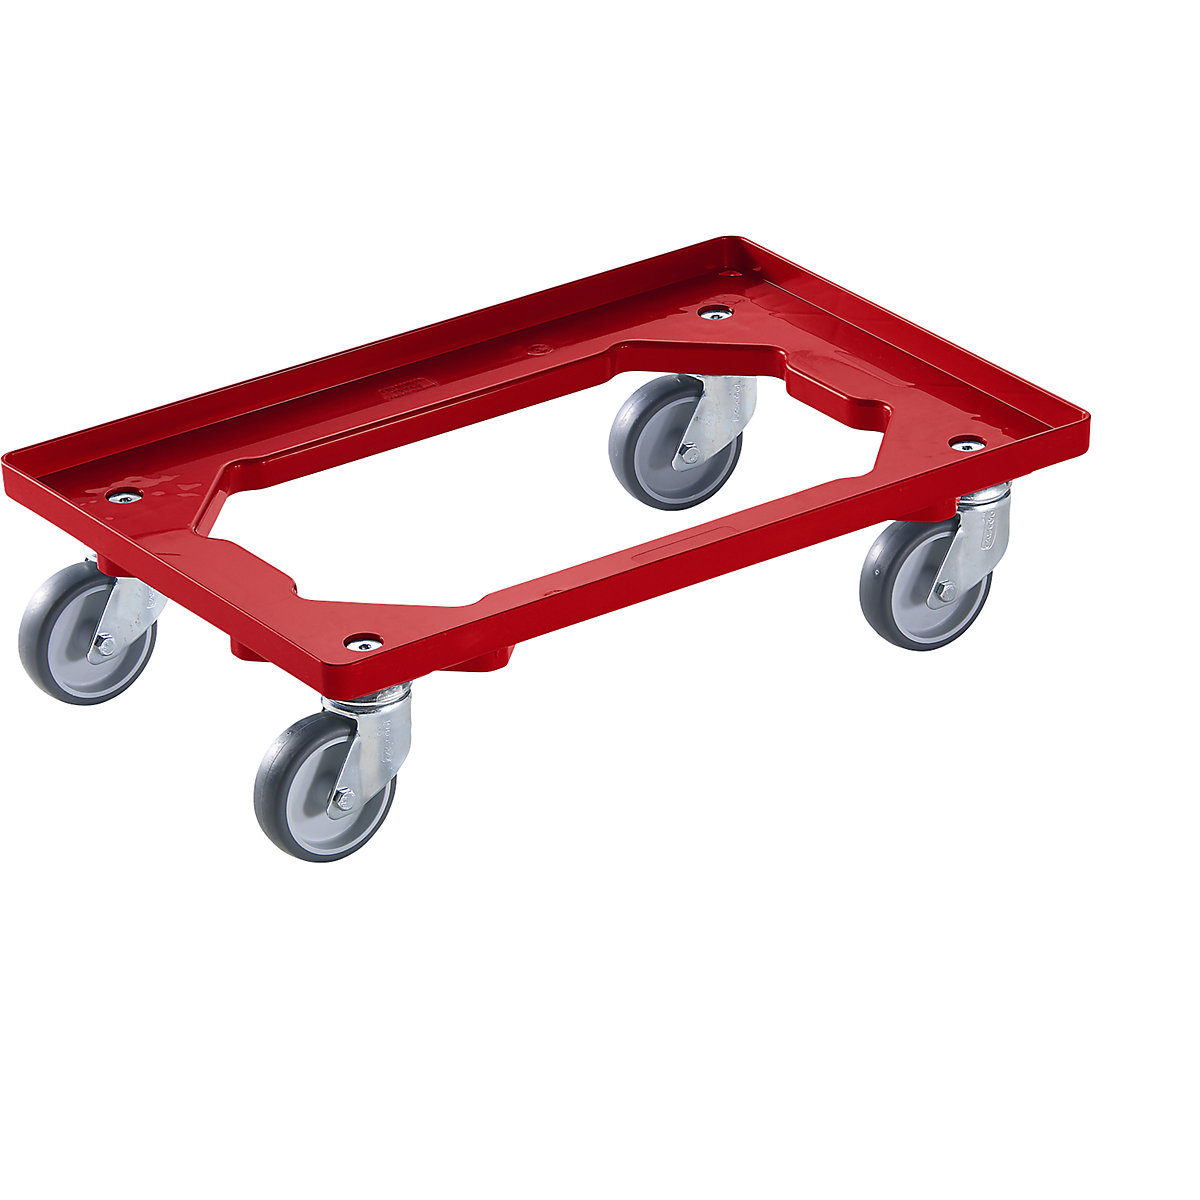 Professional wheeled base, 600 x 400 mm – eurokraft basic, 4 swivel castors with rubber tyres, red, 20+ items-4